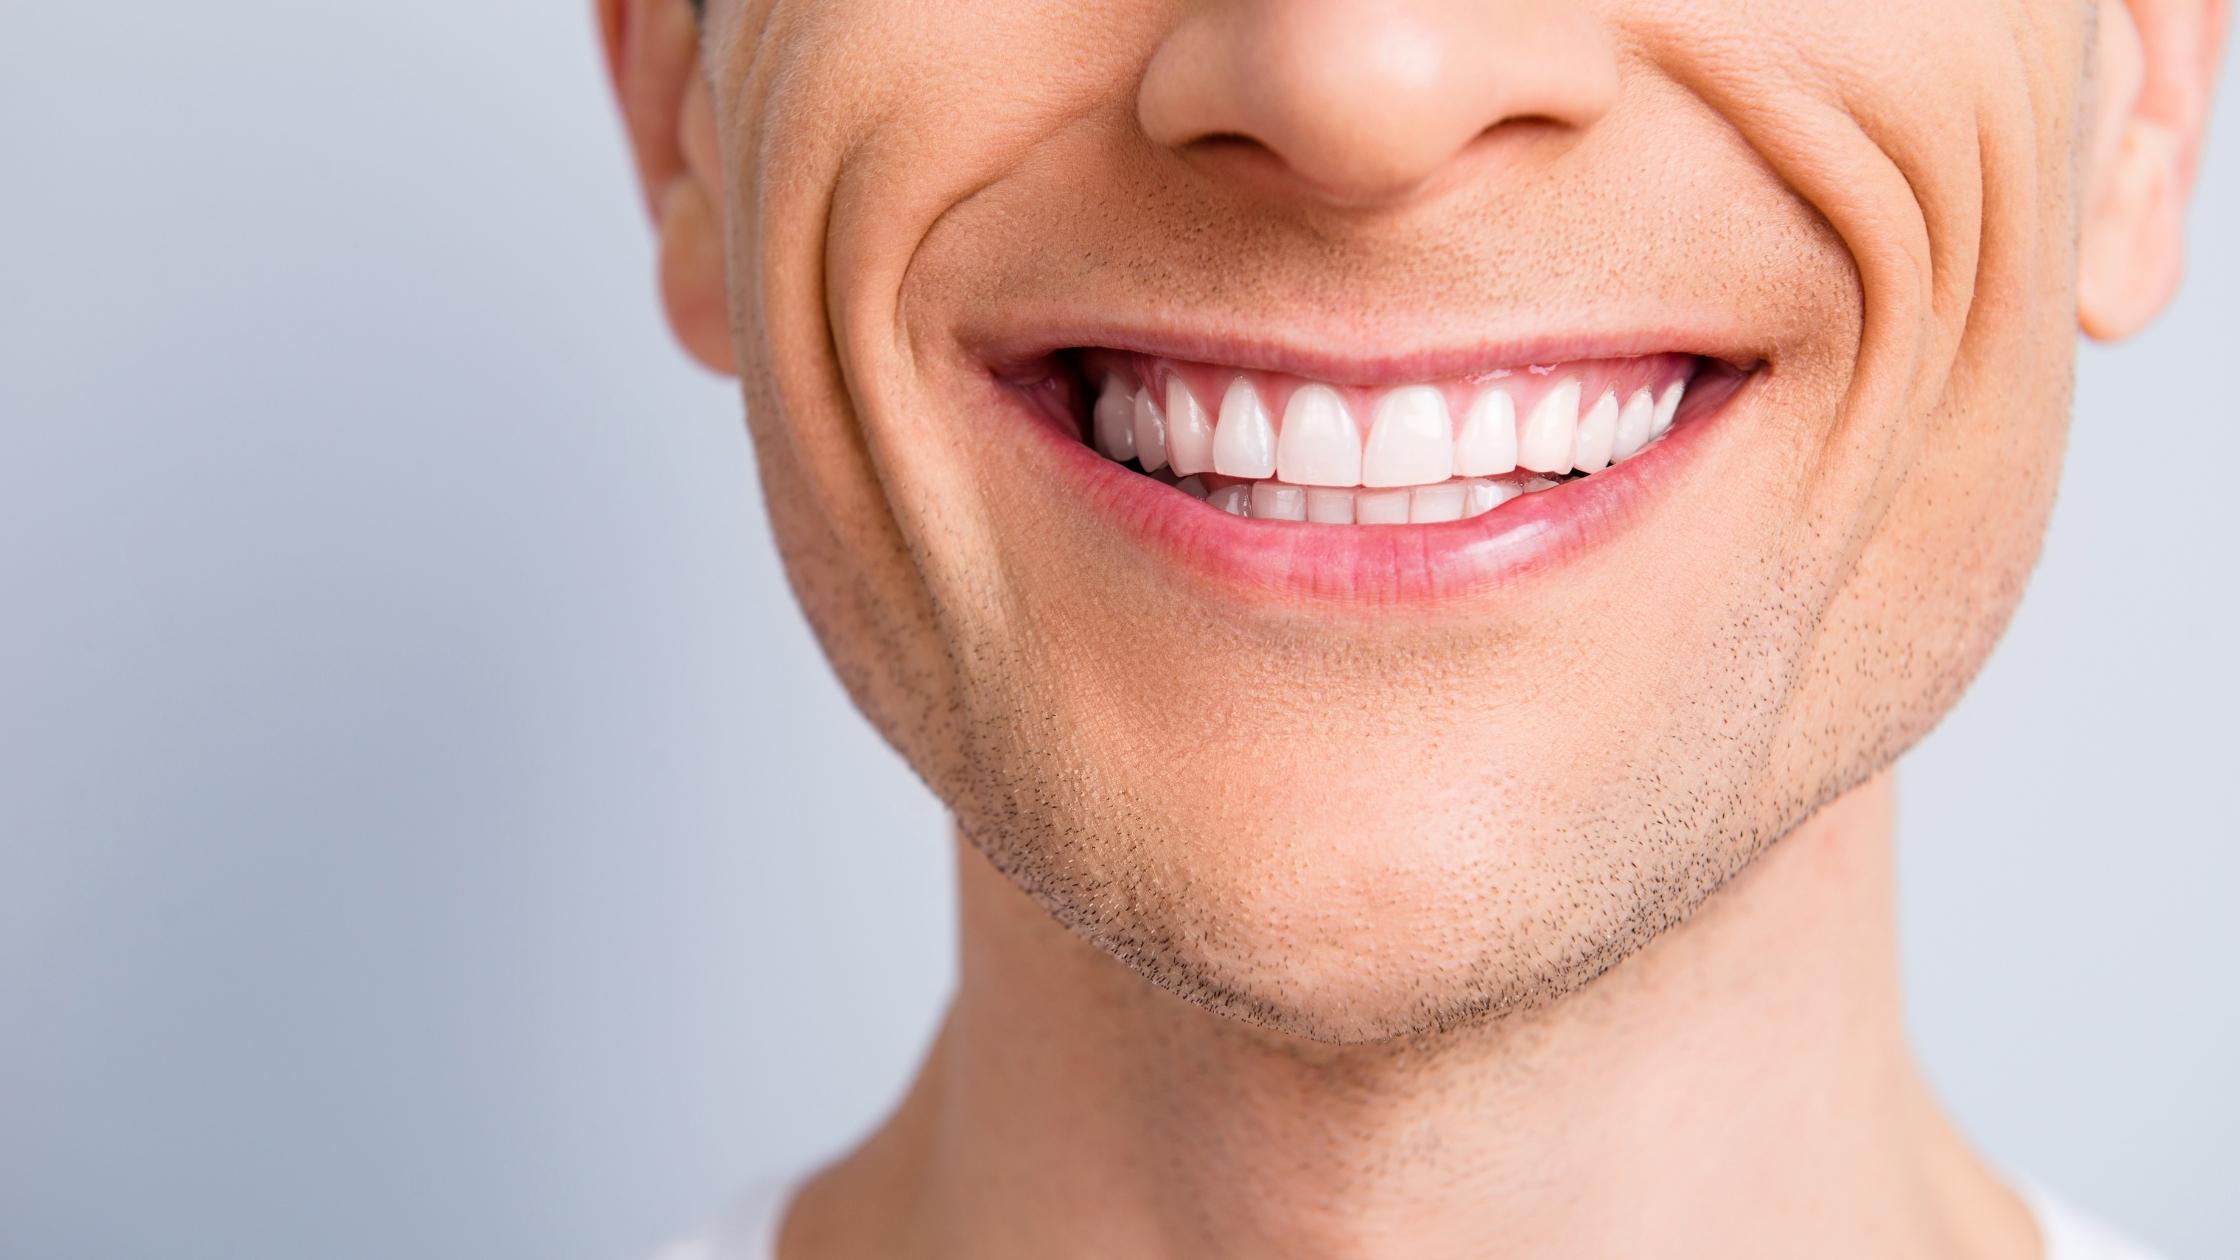 How good is a Dental Implant in mouth? - Royal Dental Clinics Blog